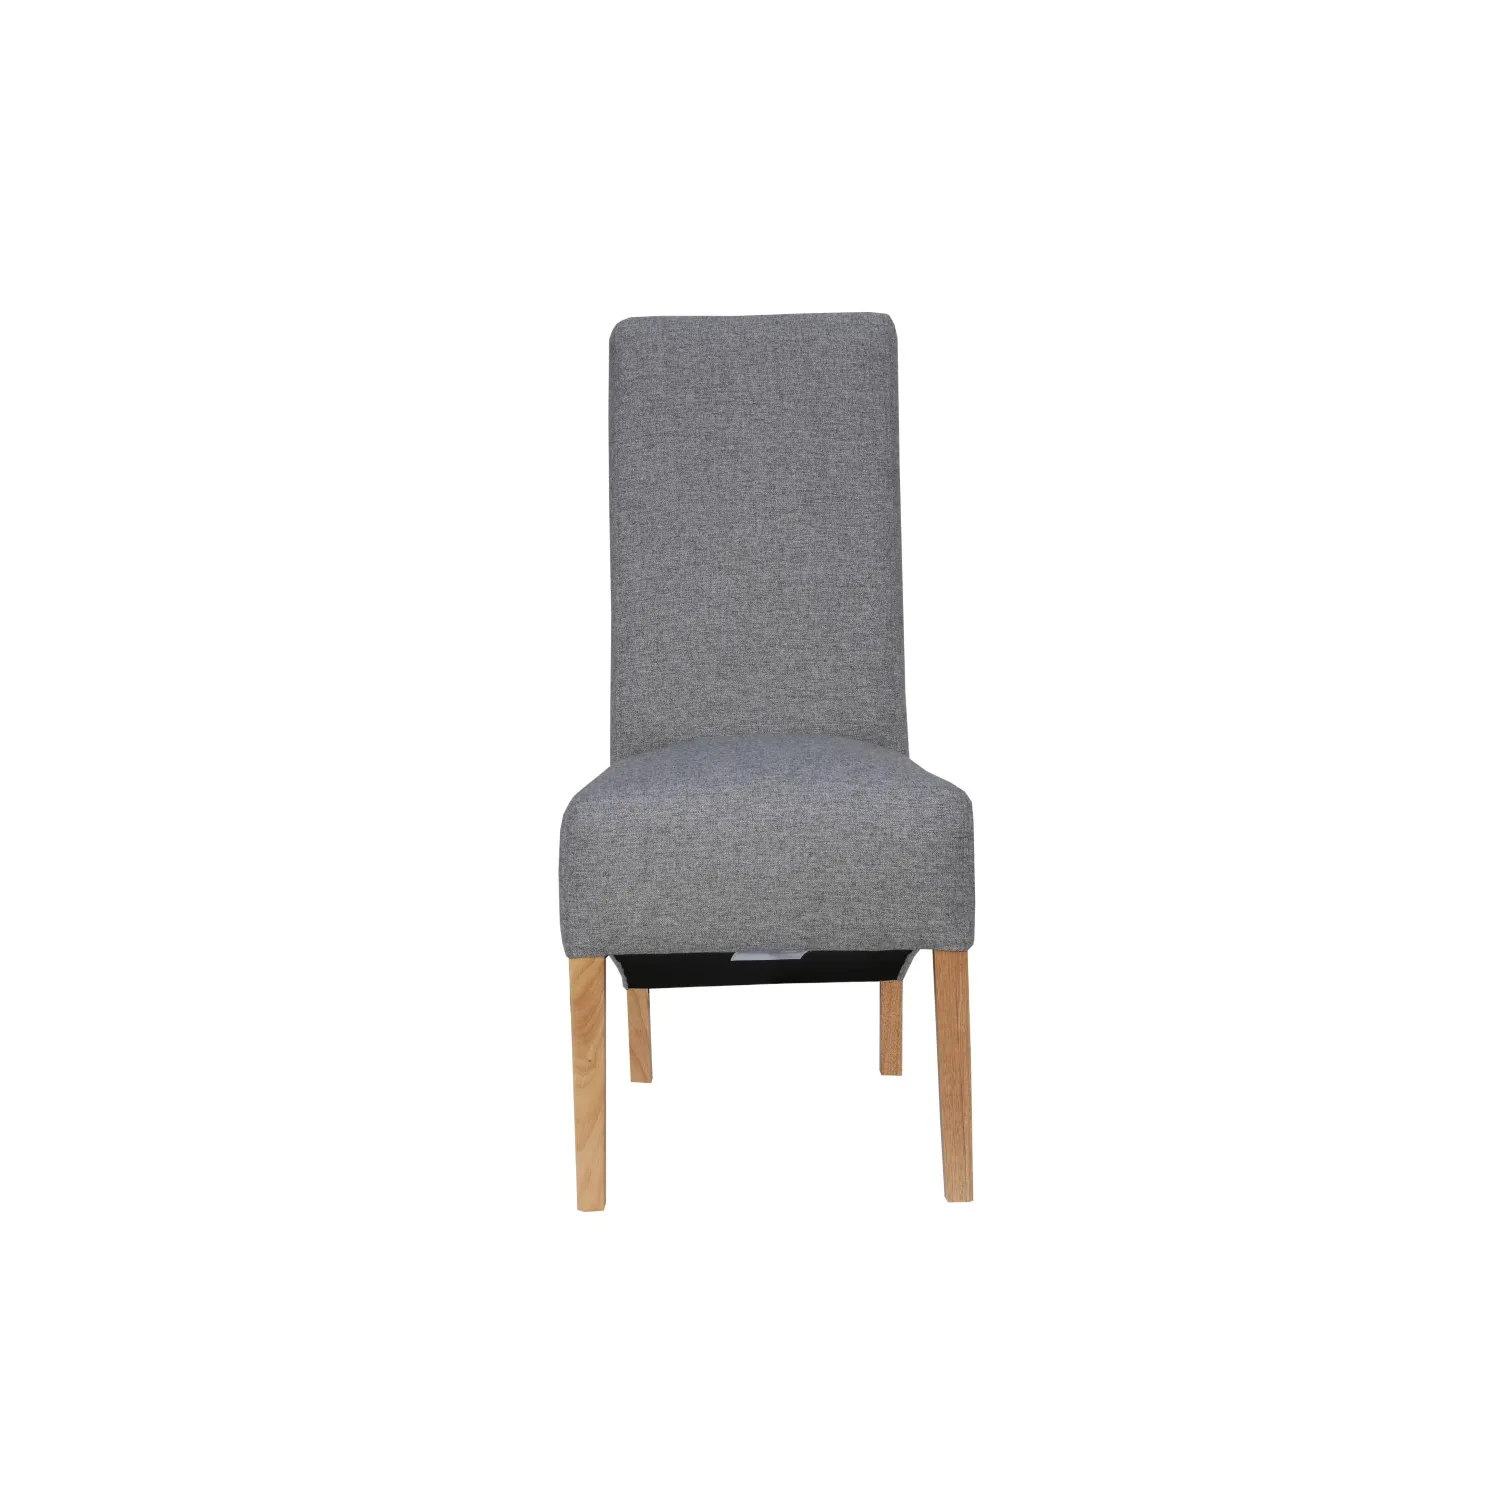 Light Grey Wool Wooden Dining Chair